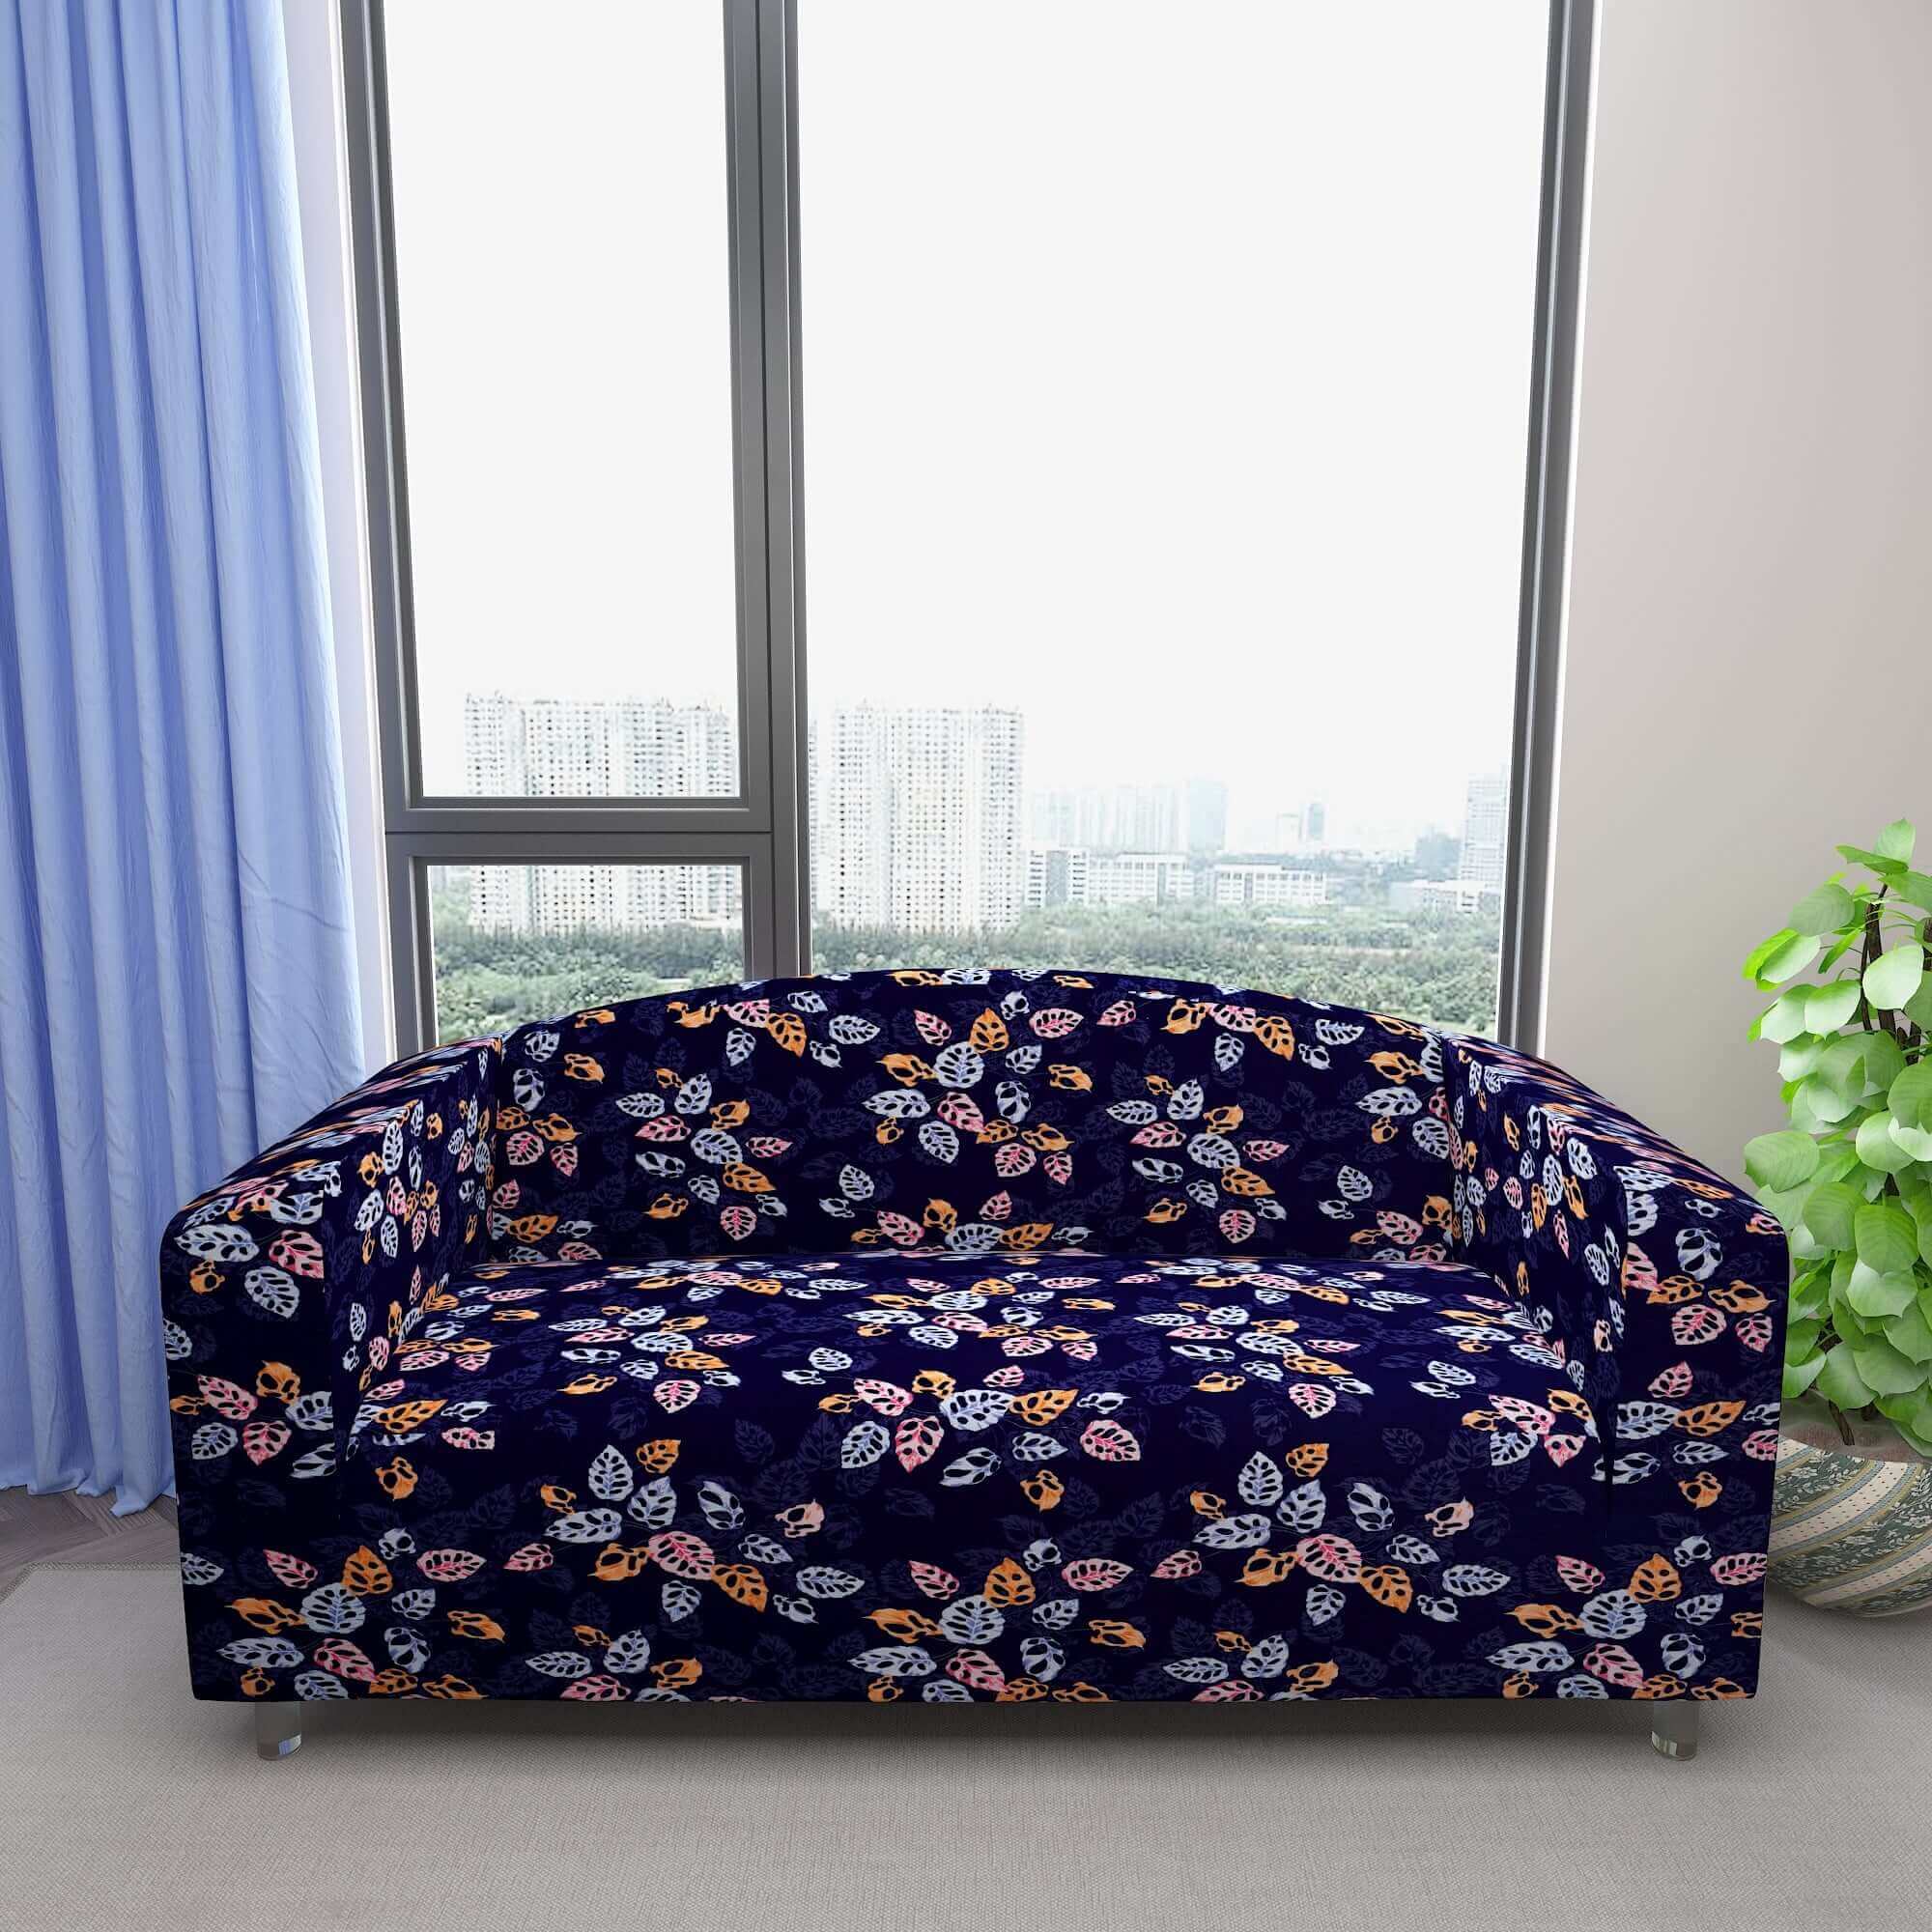 Marigold Printed Sofa Protector Cover Full Stretchable, MG01 - Dream Care Furnishings Private Limited